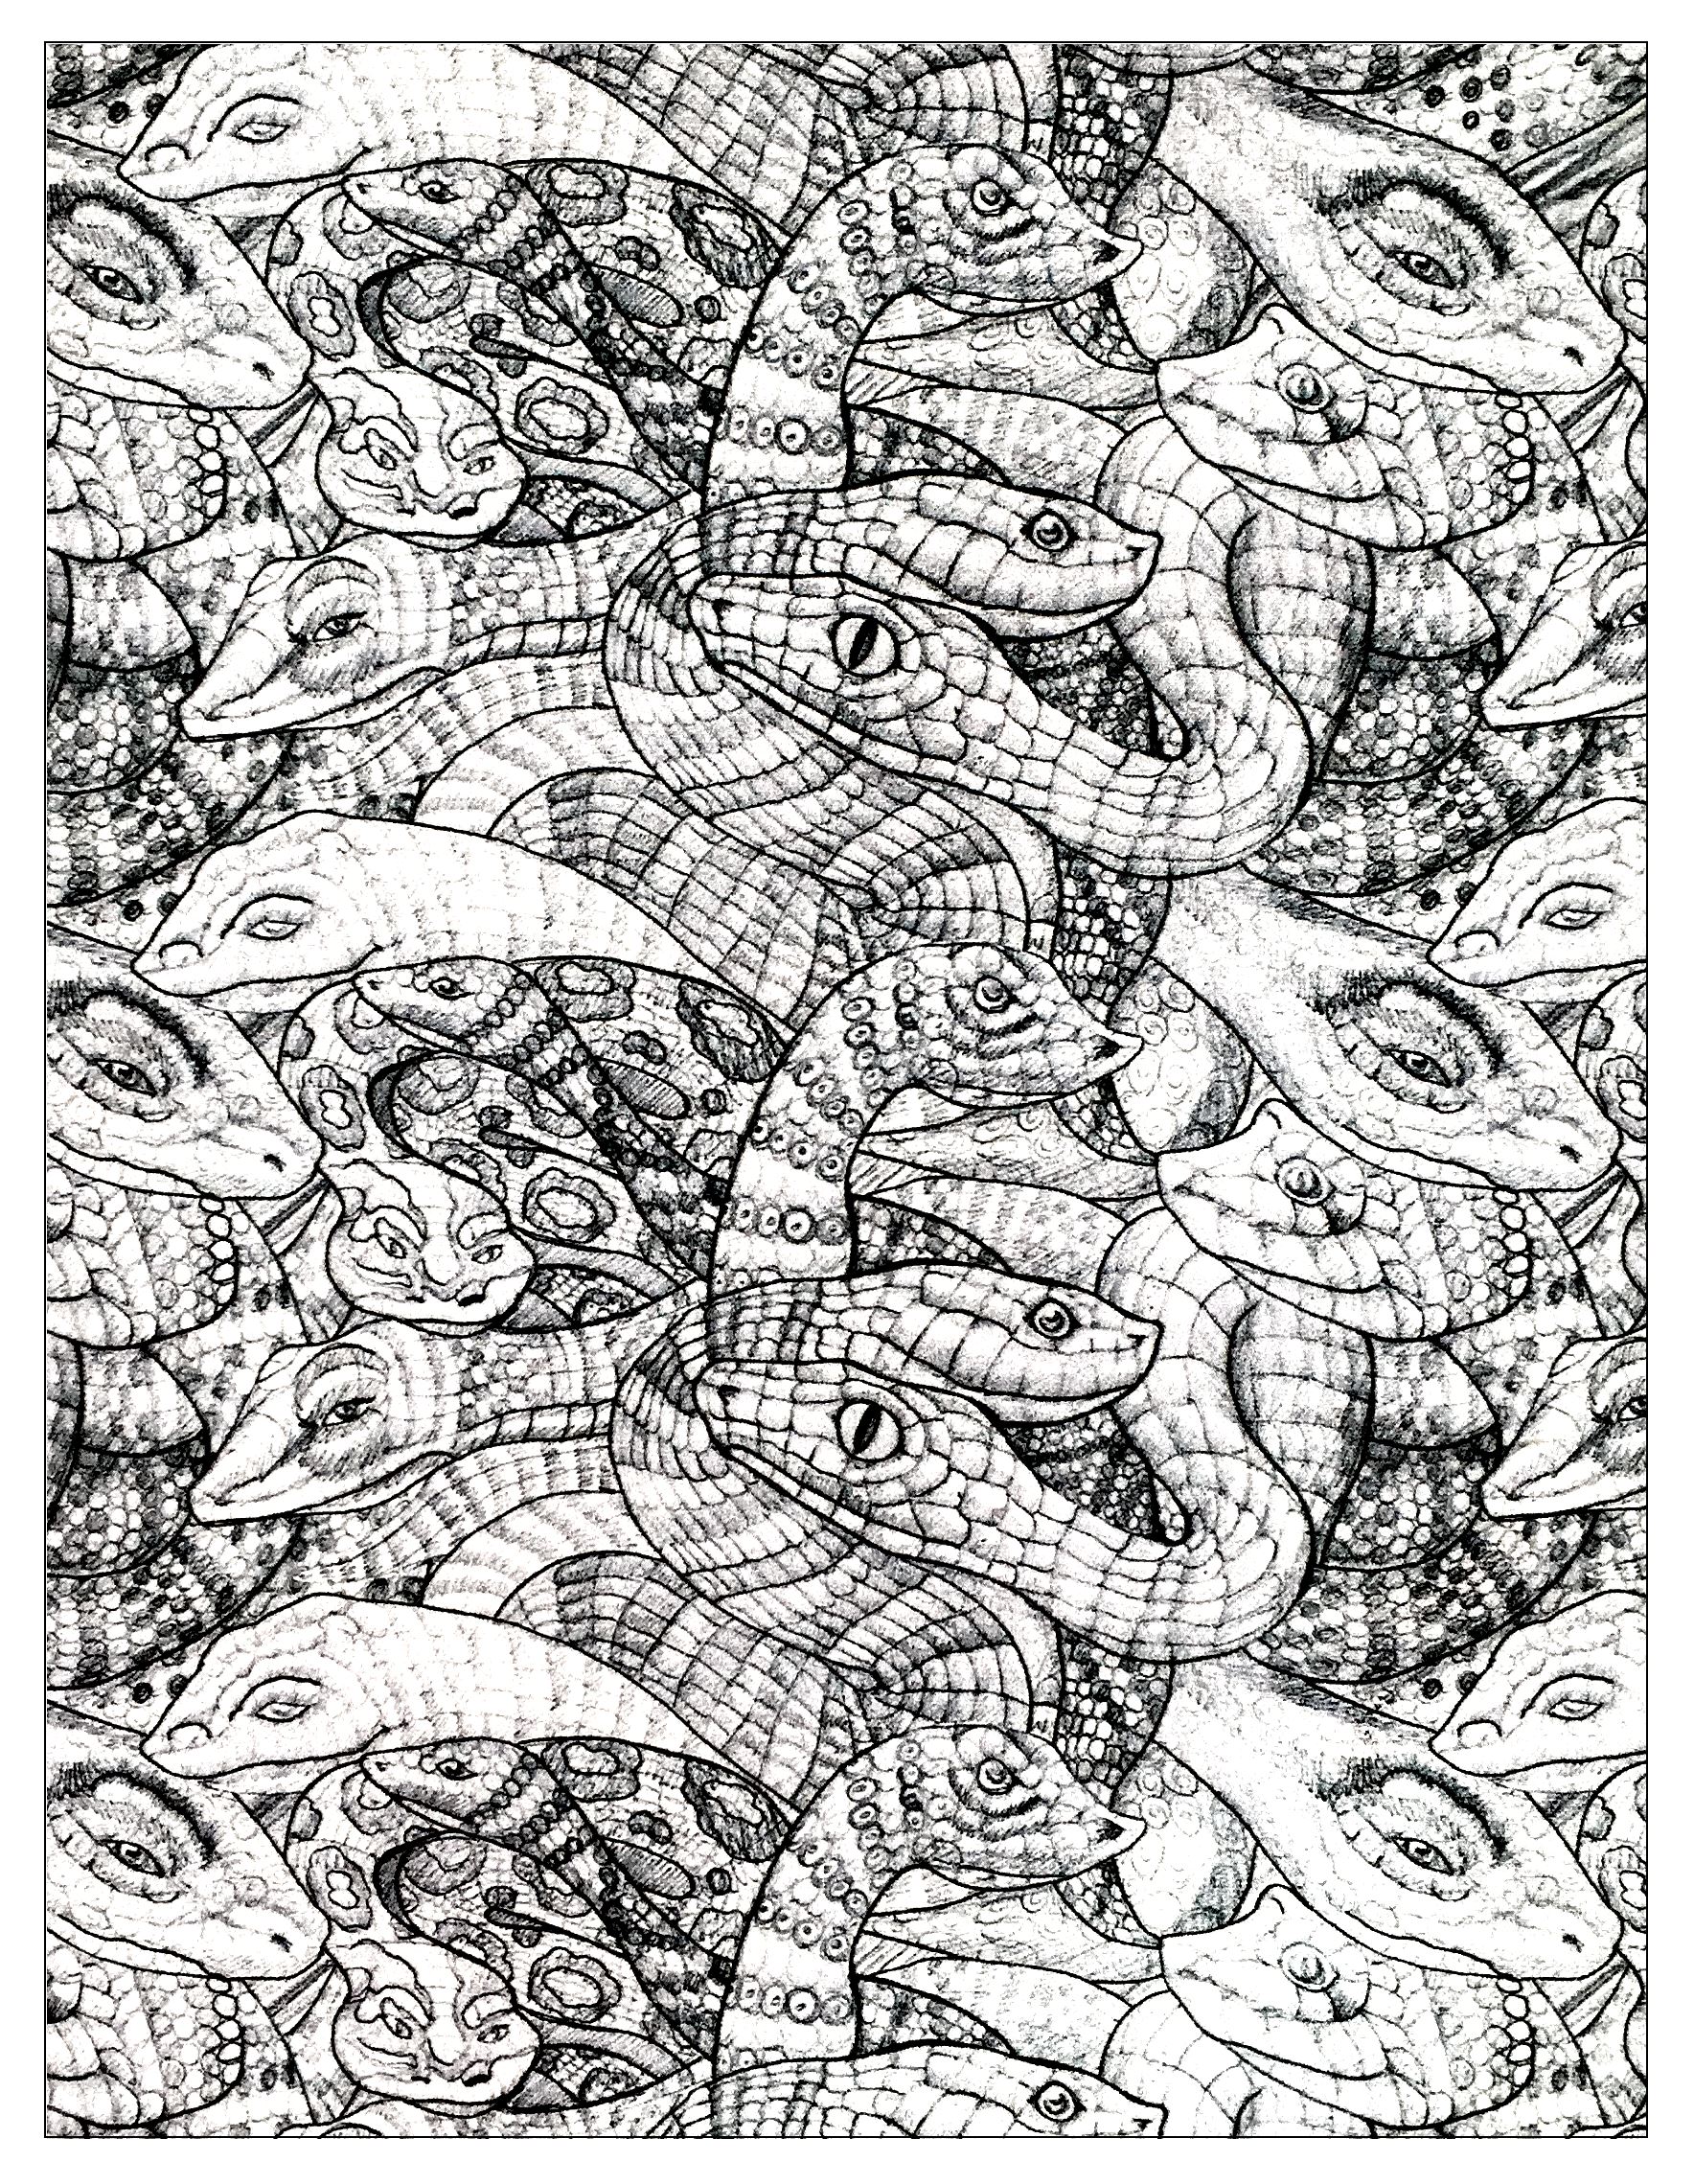 7 image=animaux coloriage adultes serpents 2 1